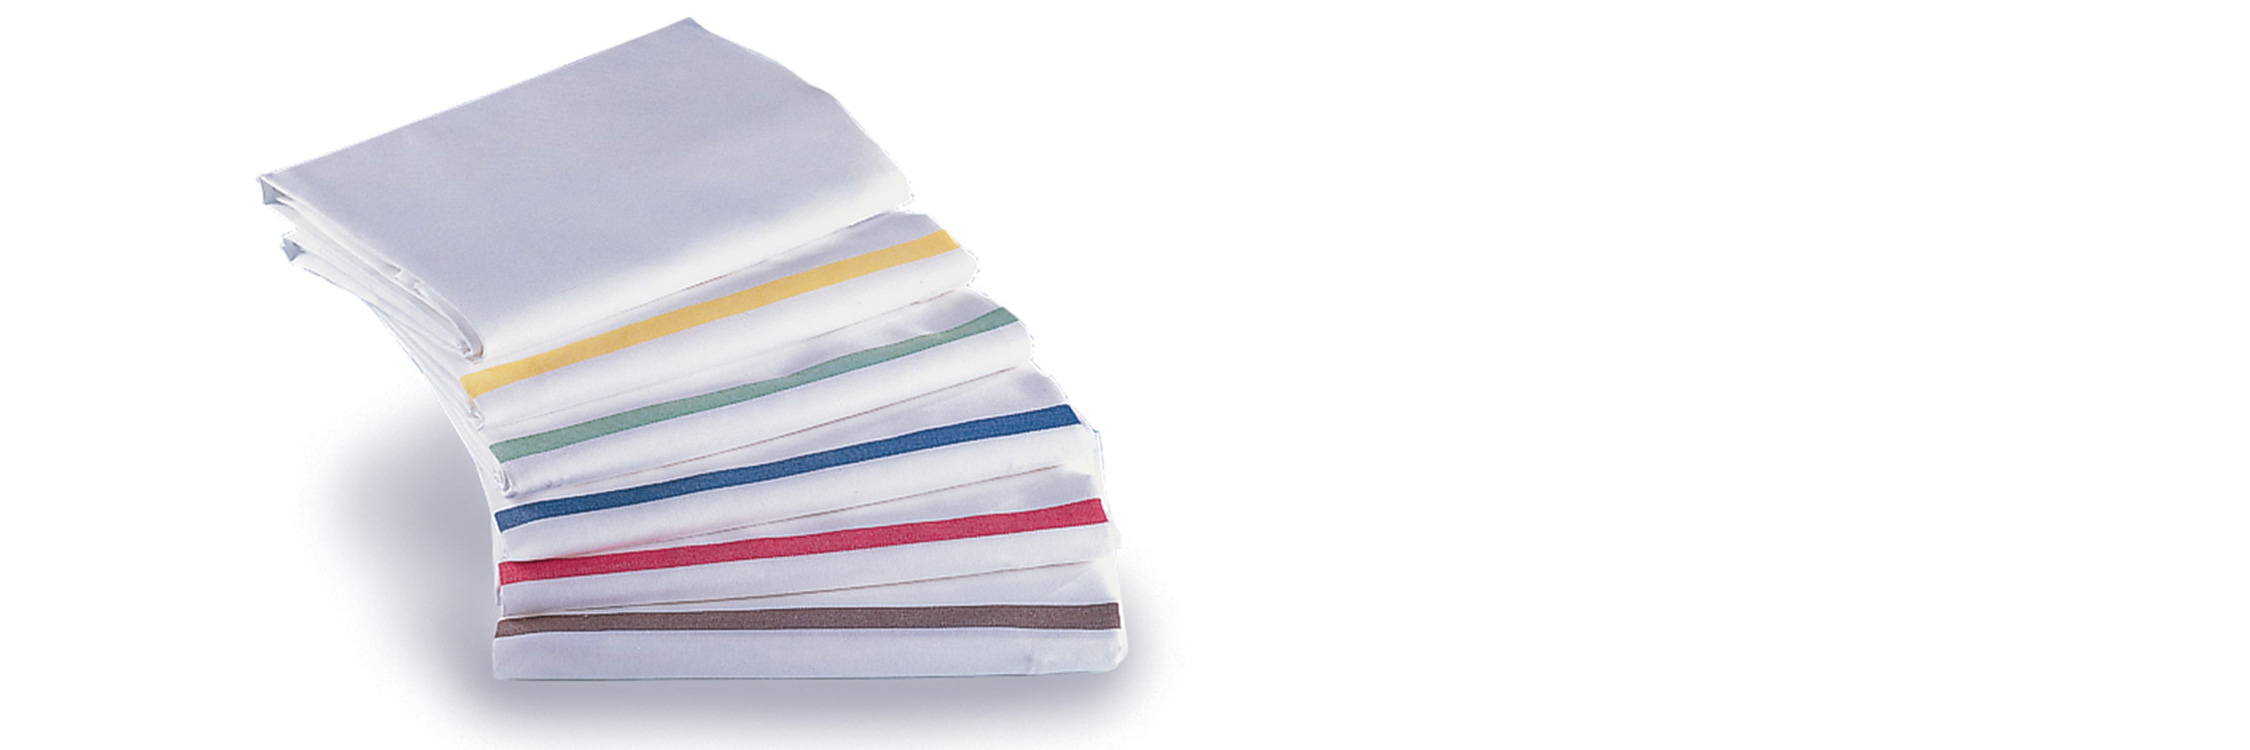 bags for dirty linen with different identifying colour stripes